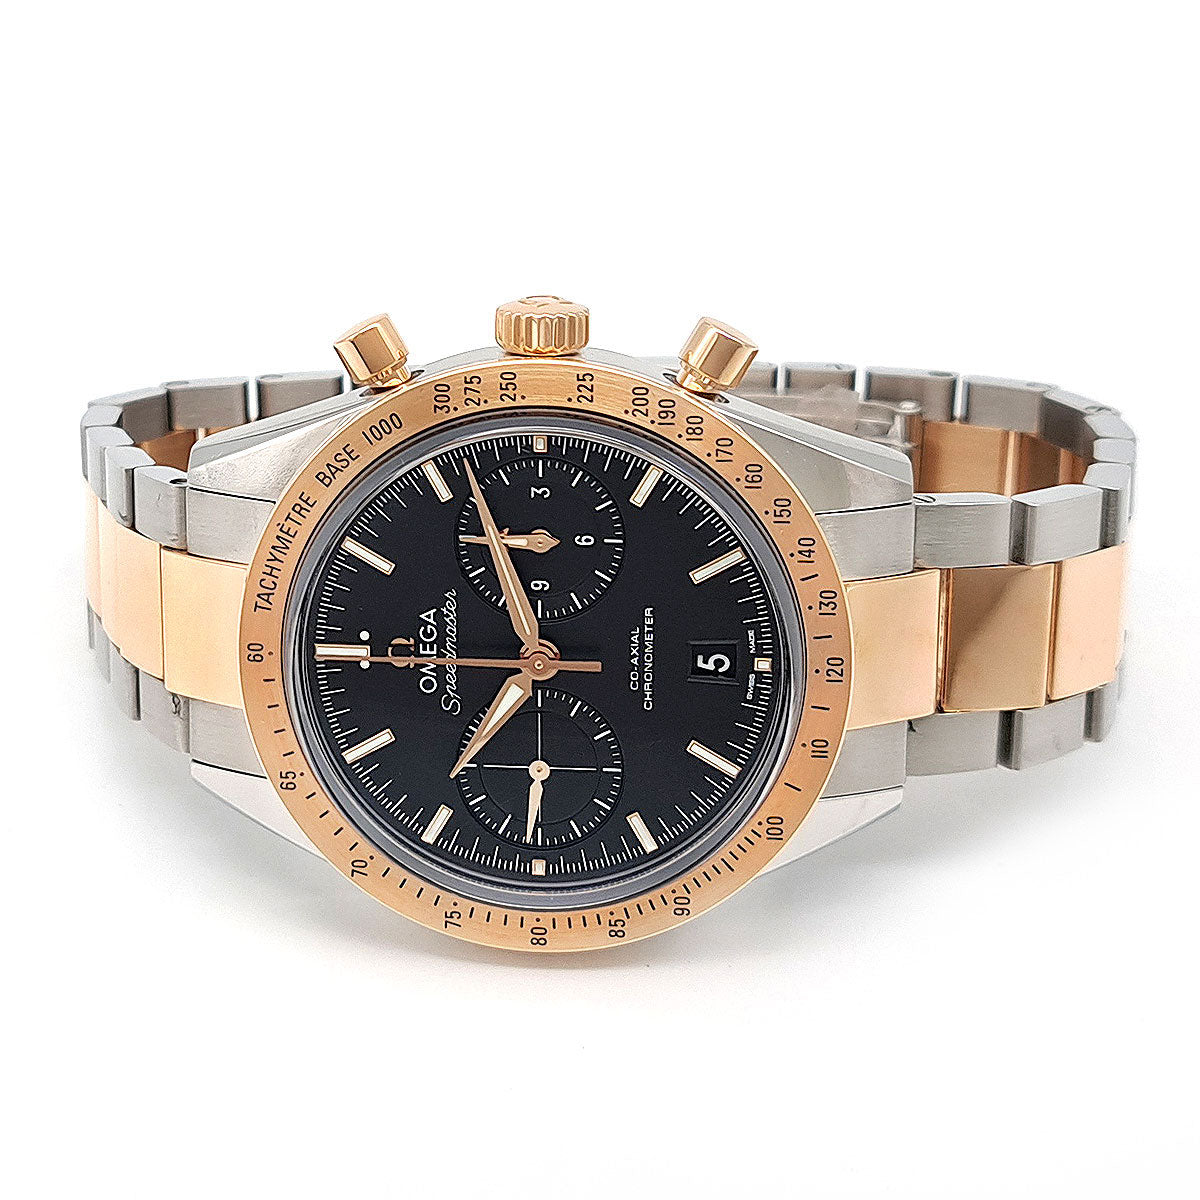 OMEGA Speedmaster '57 Co-Axial Chronograph Men's Watch in Stainless Steel & Pink Gold 331.20.42.51.01.002